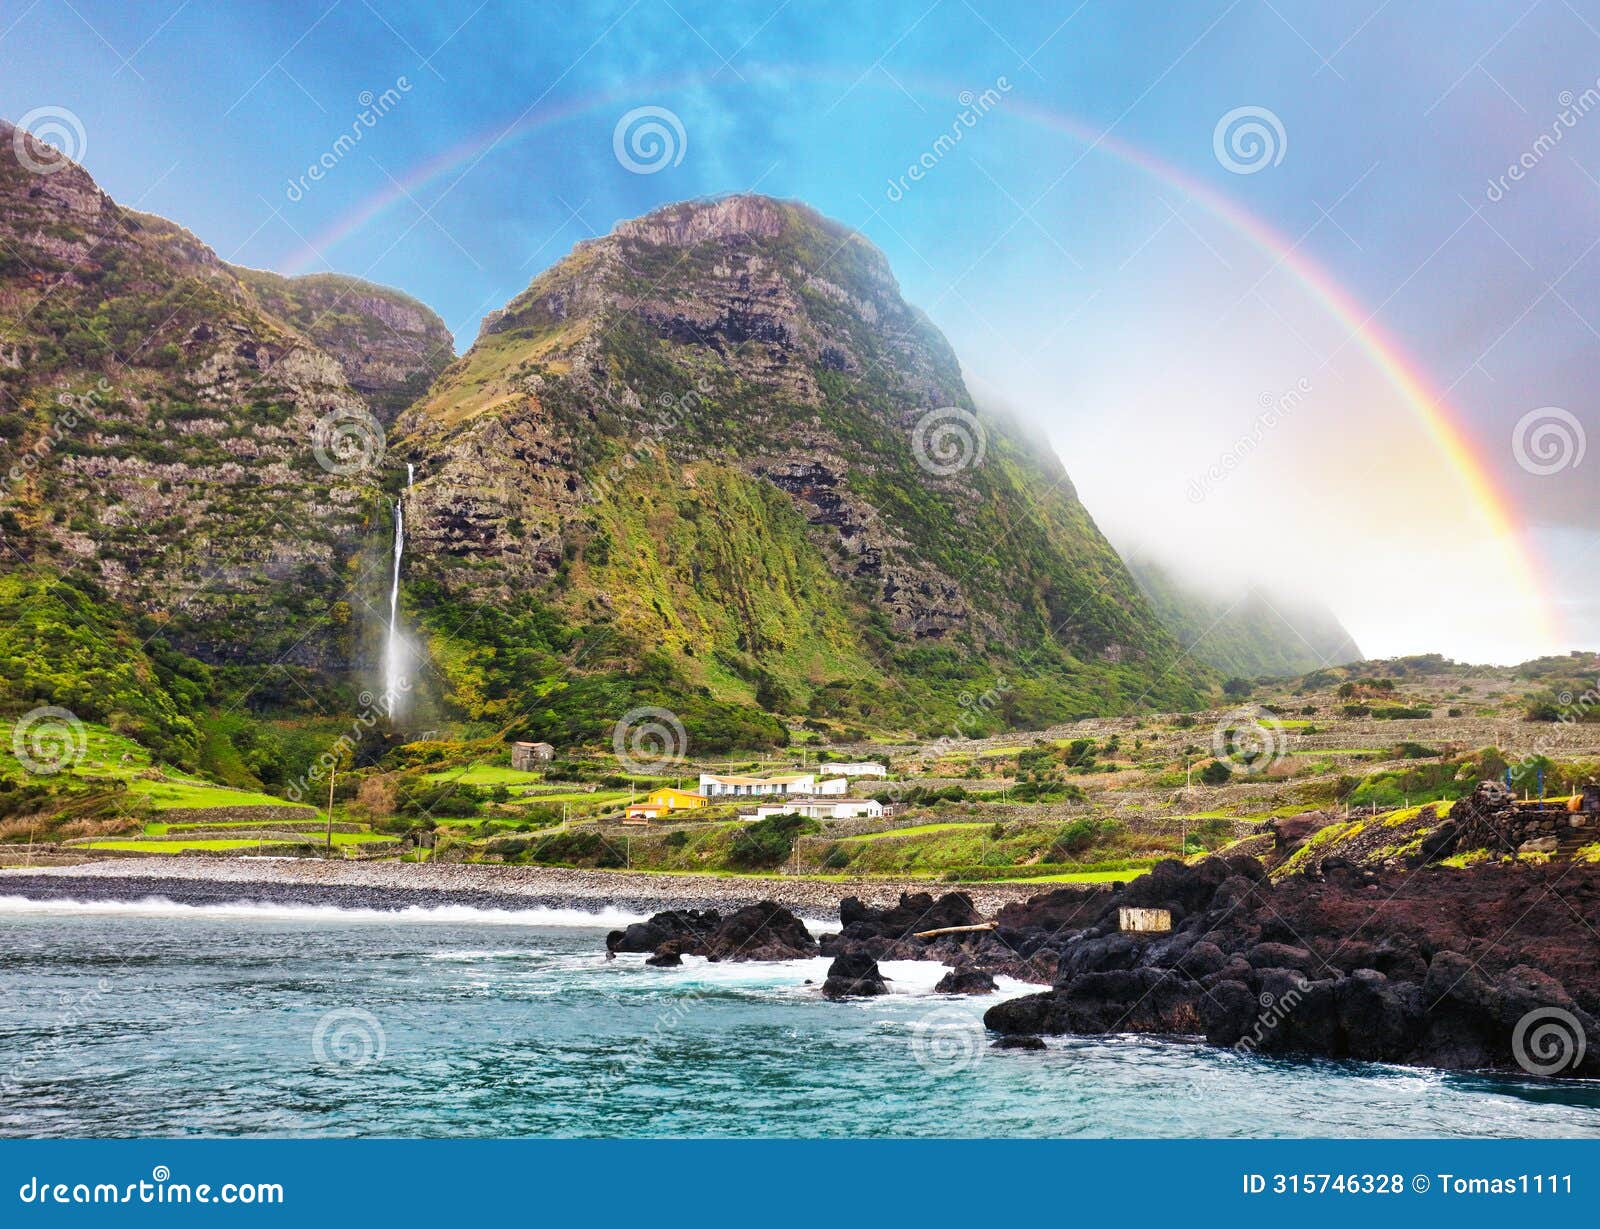 waterfall with rainbow in faja grande, flores island, azores, portugal, europa